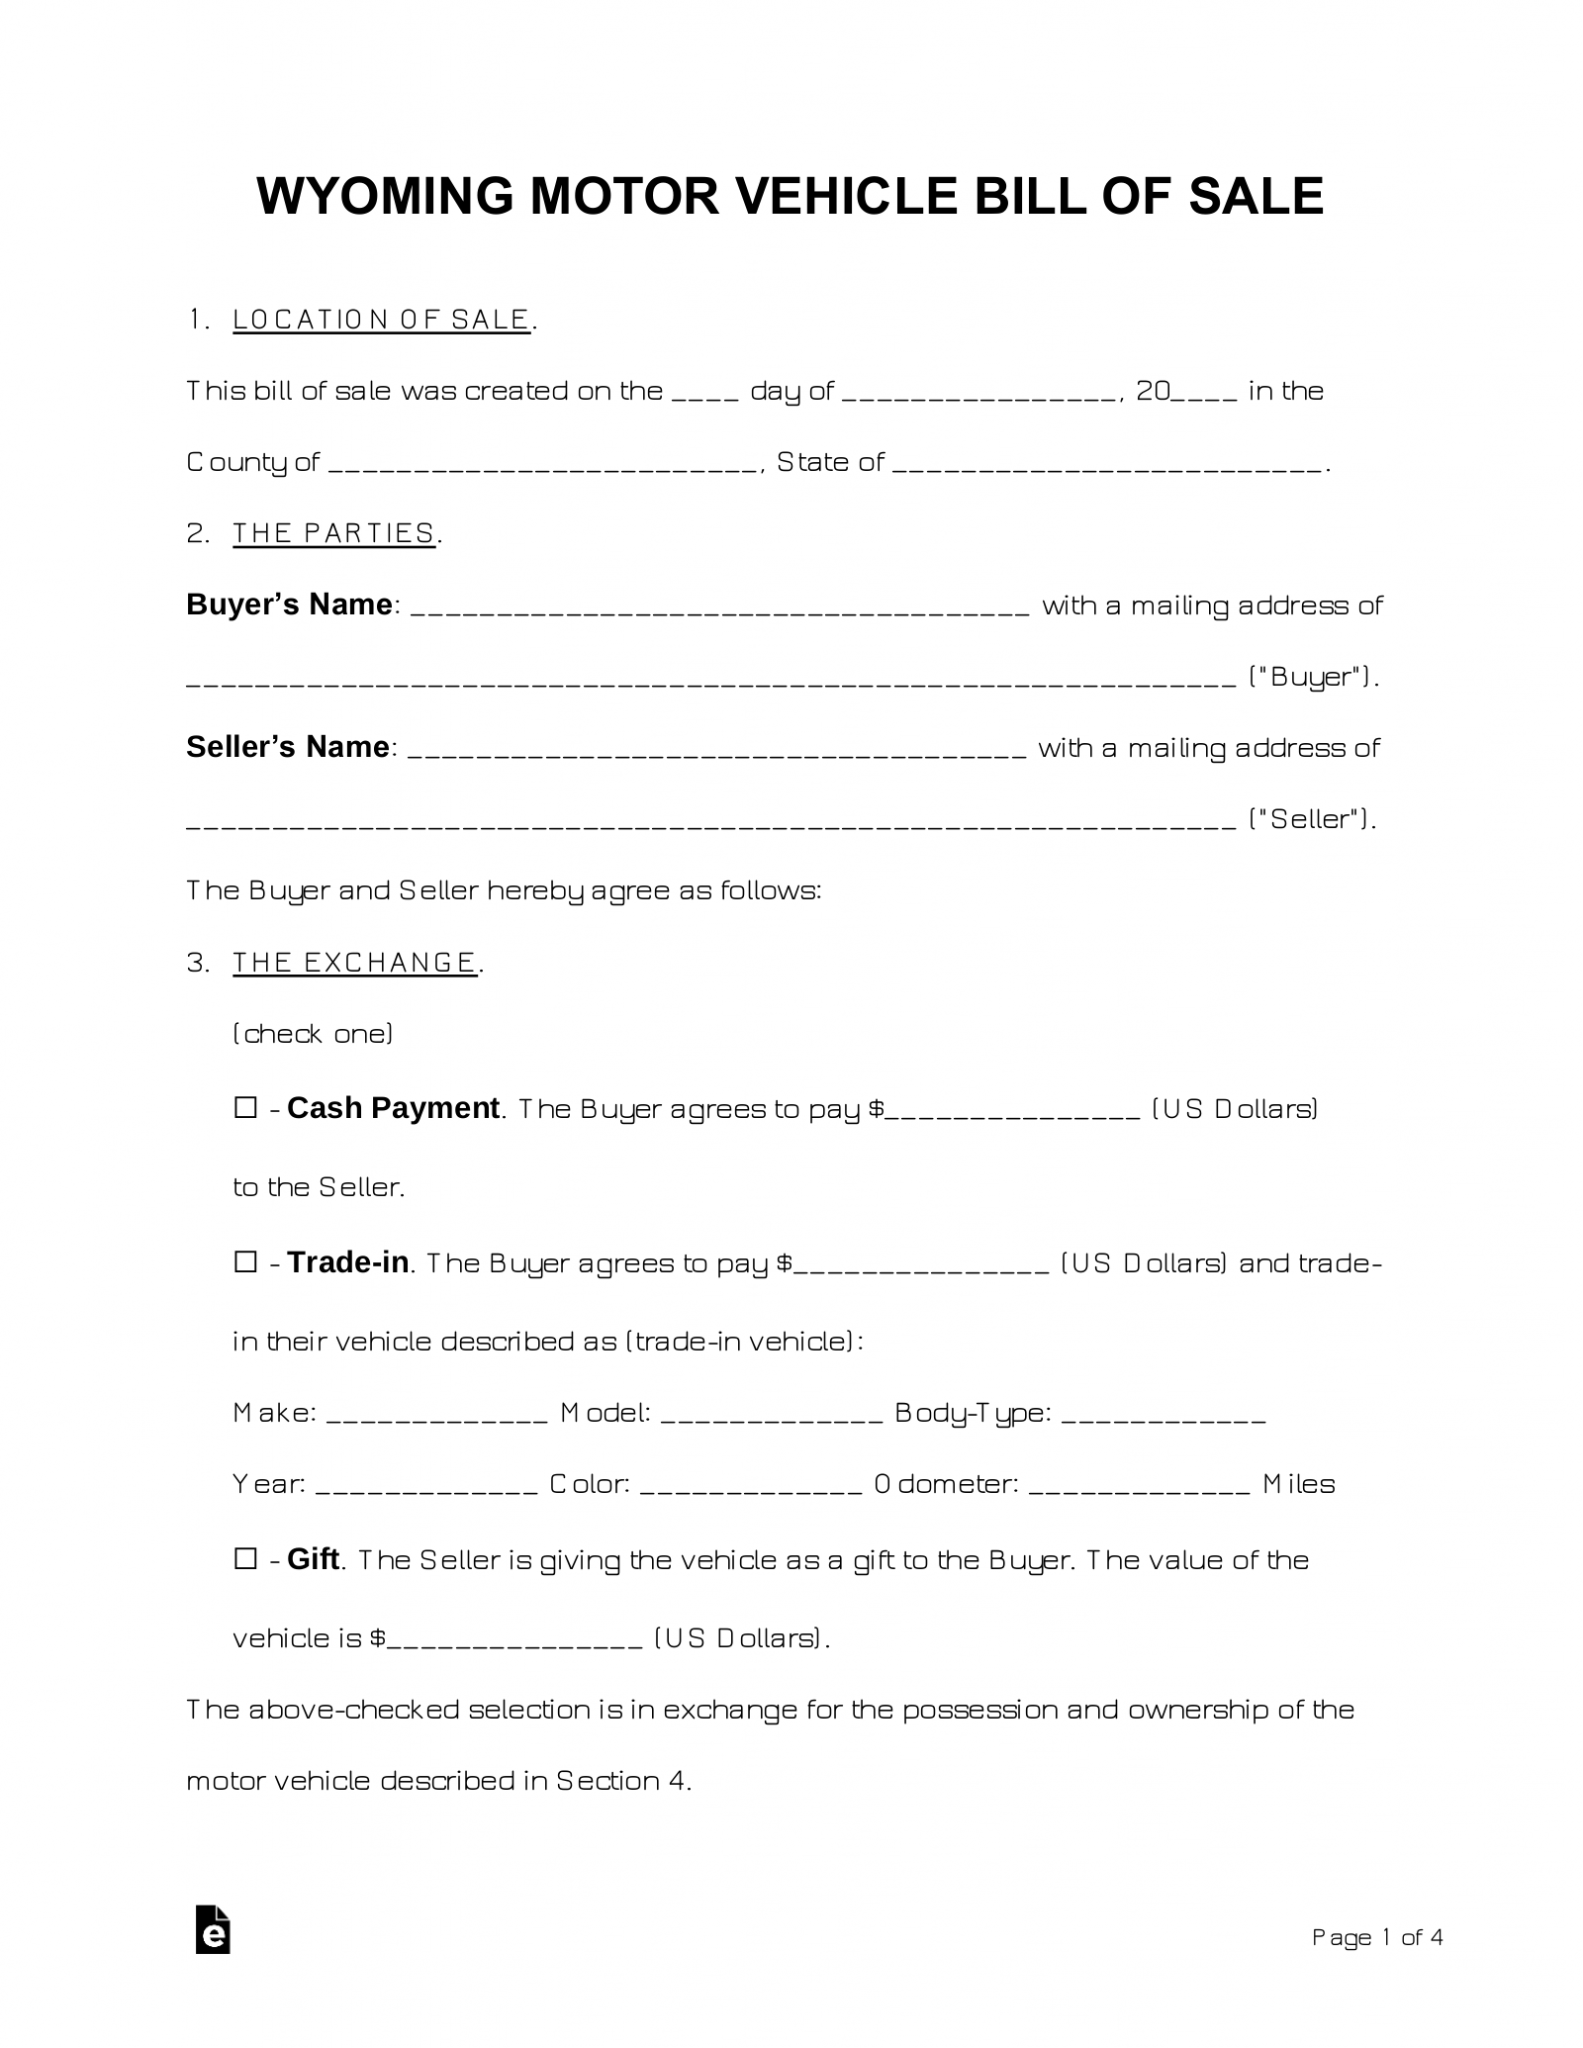 Free Wyoming Motor Vehicle Bill of Sale Forms (11) - PDF | Word – eForms